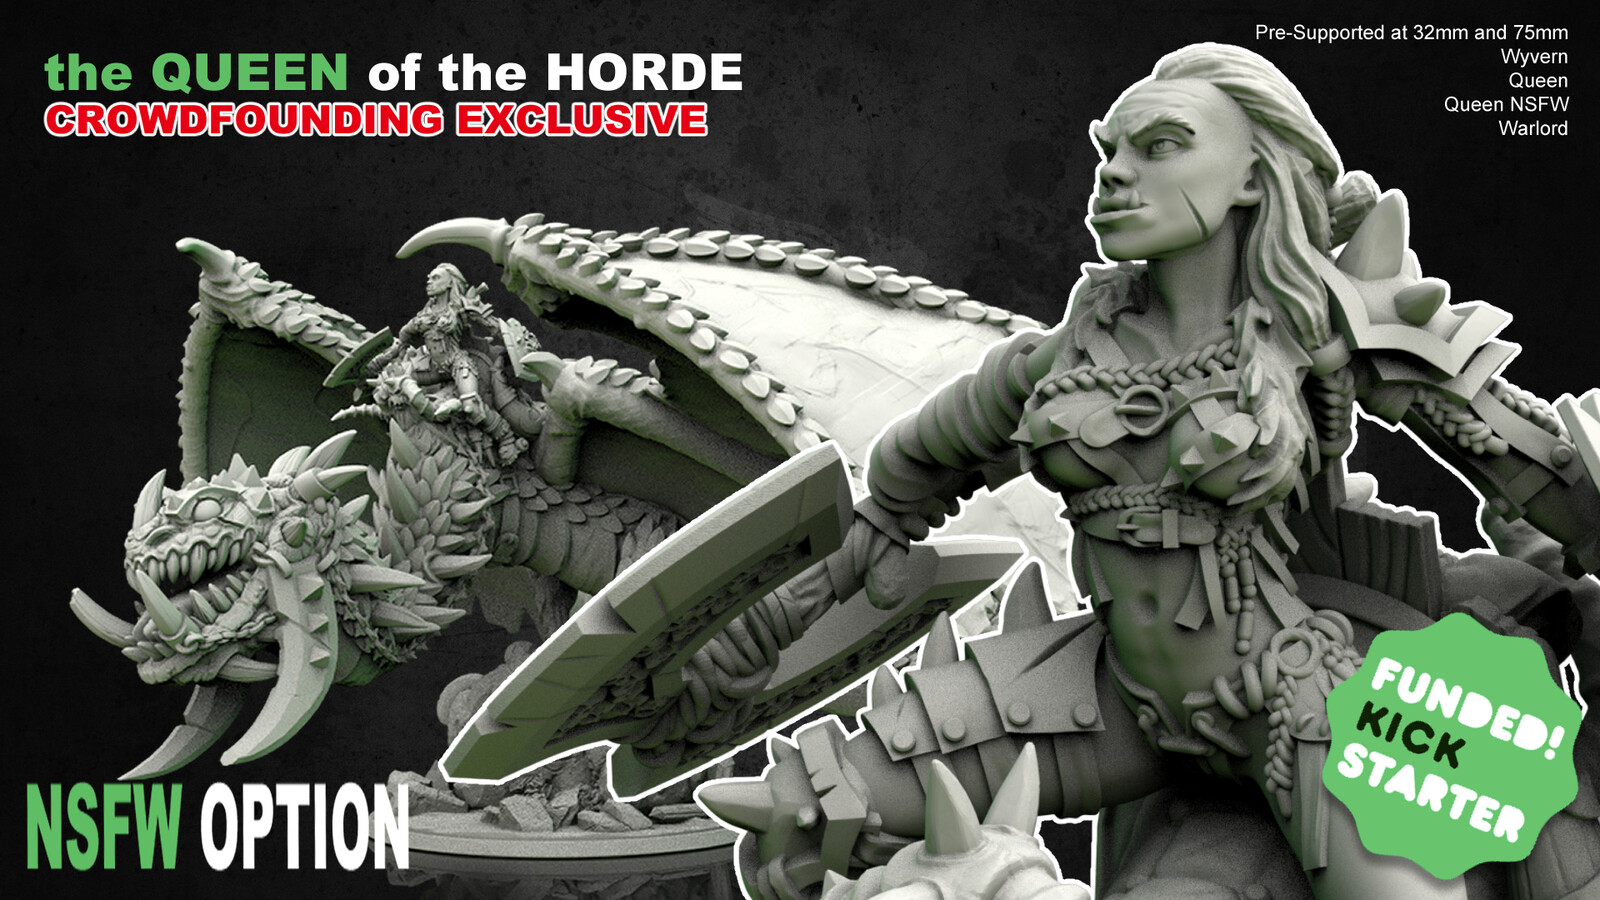 The Queen of the HORDE - Pin-Up STL for 3D Print NSFW